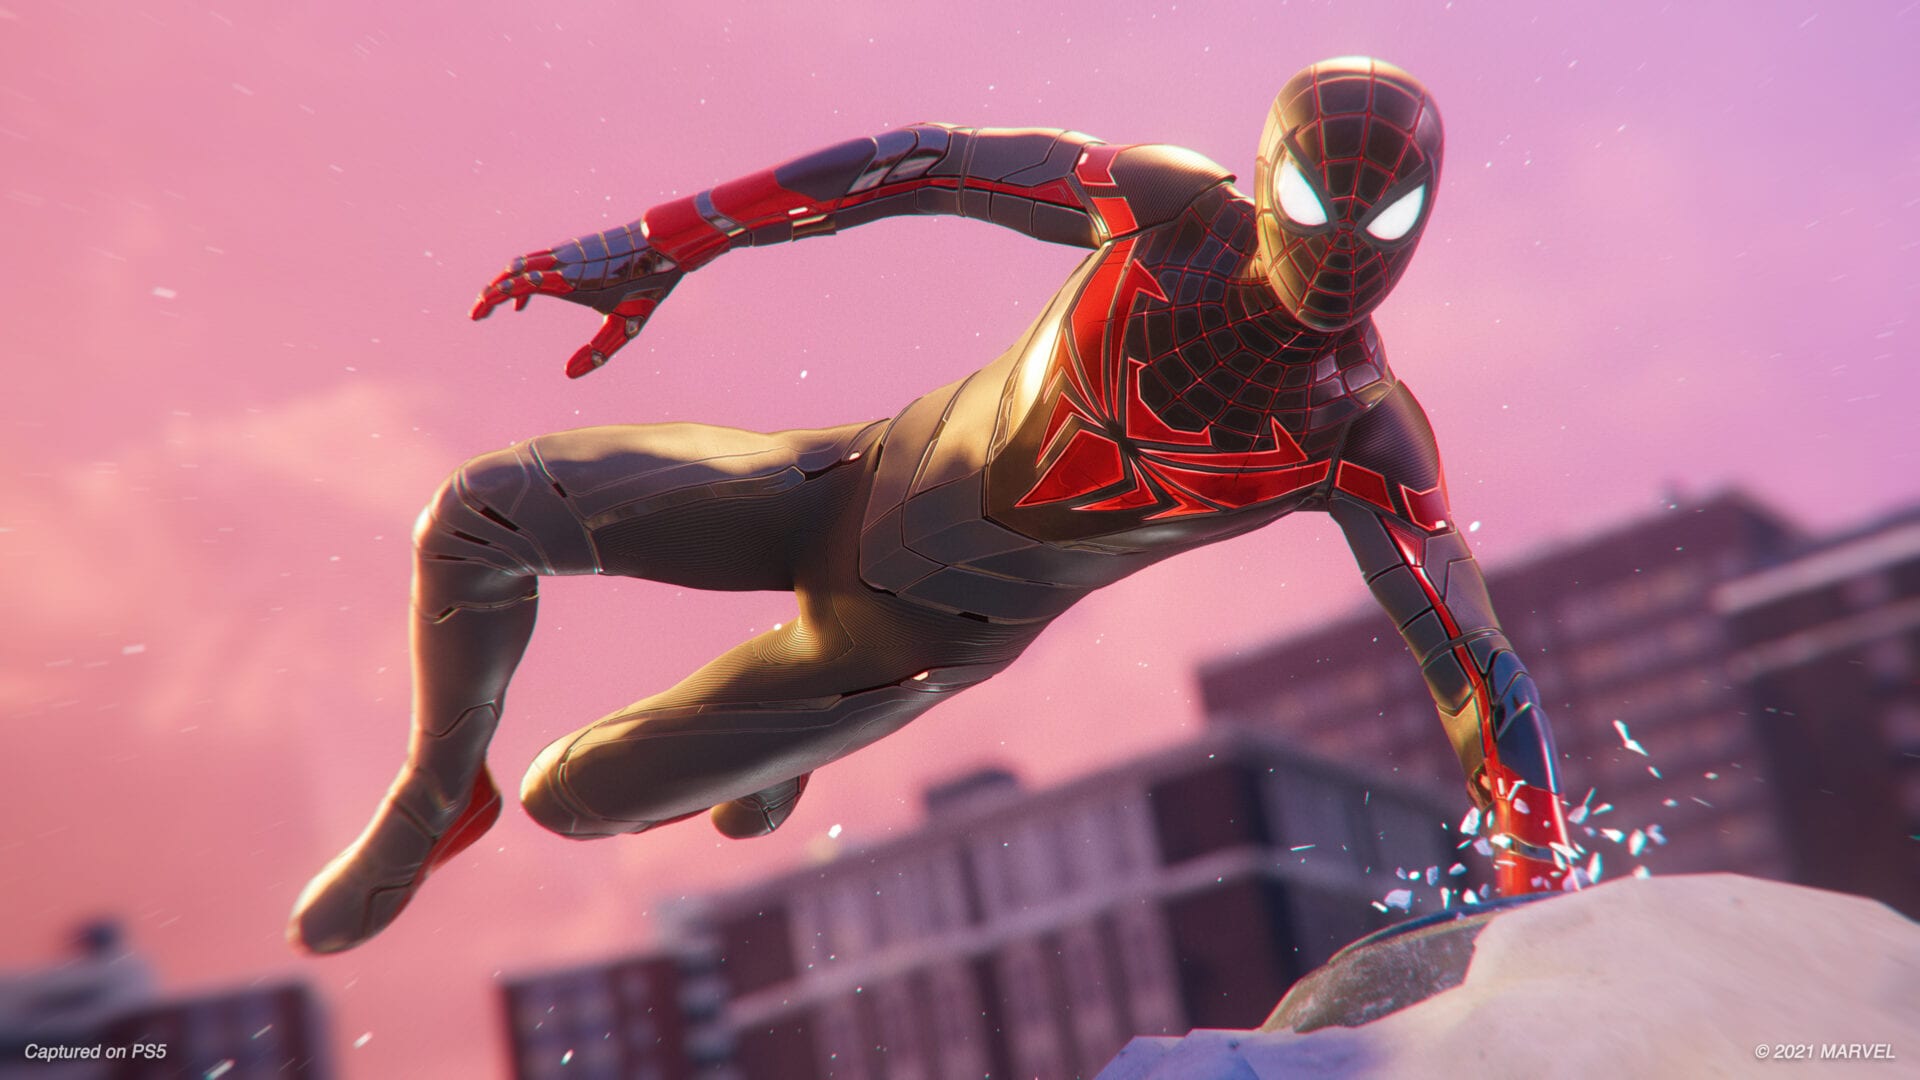 The Advanced Tech Suit in action in Spider-Man Mile Morales